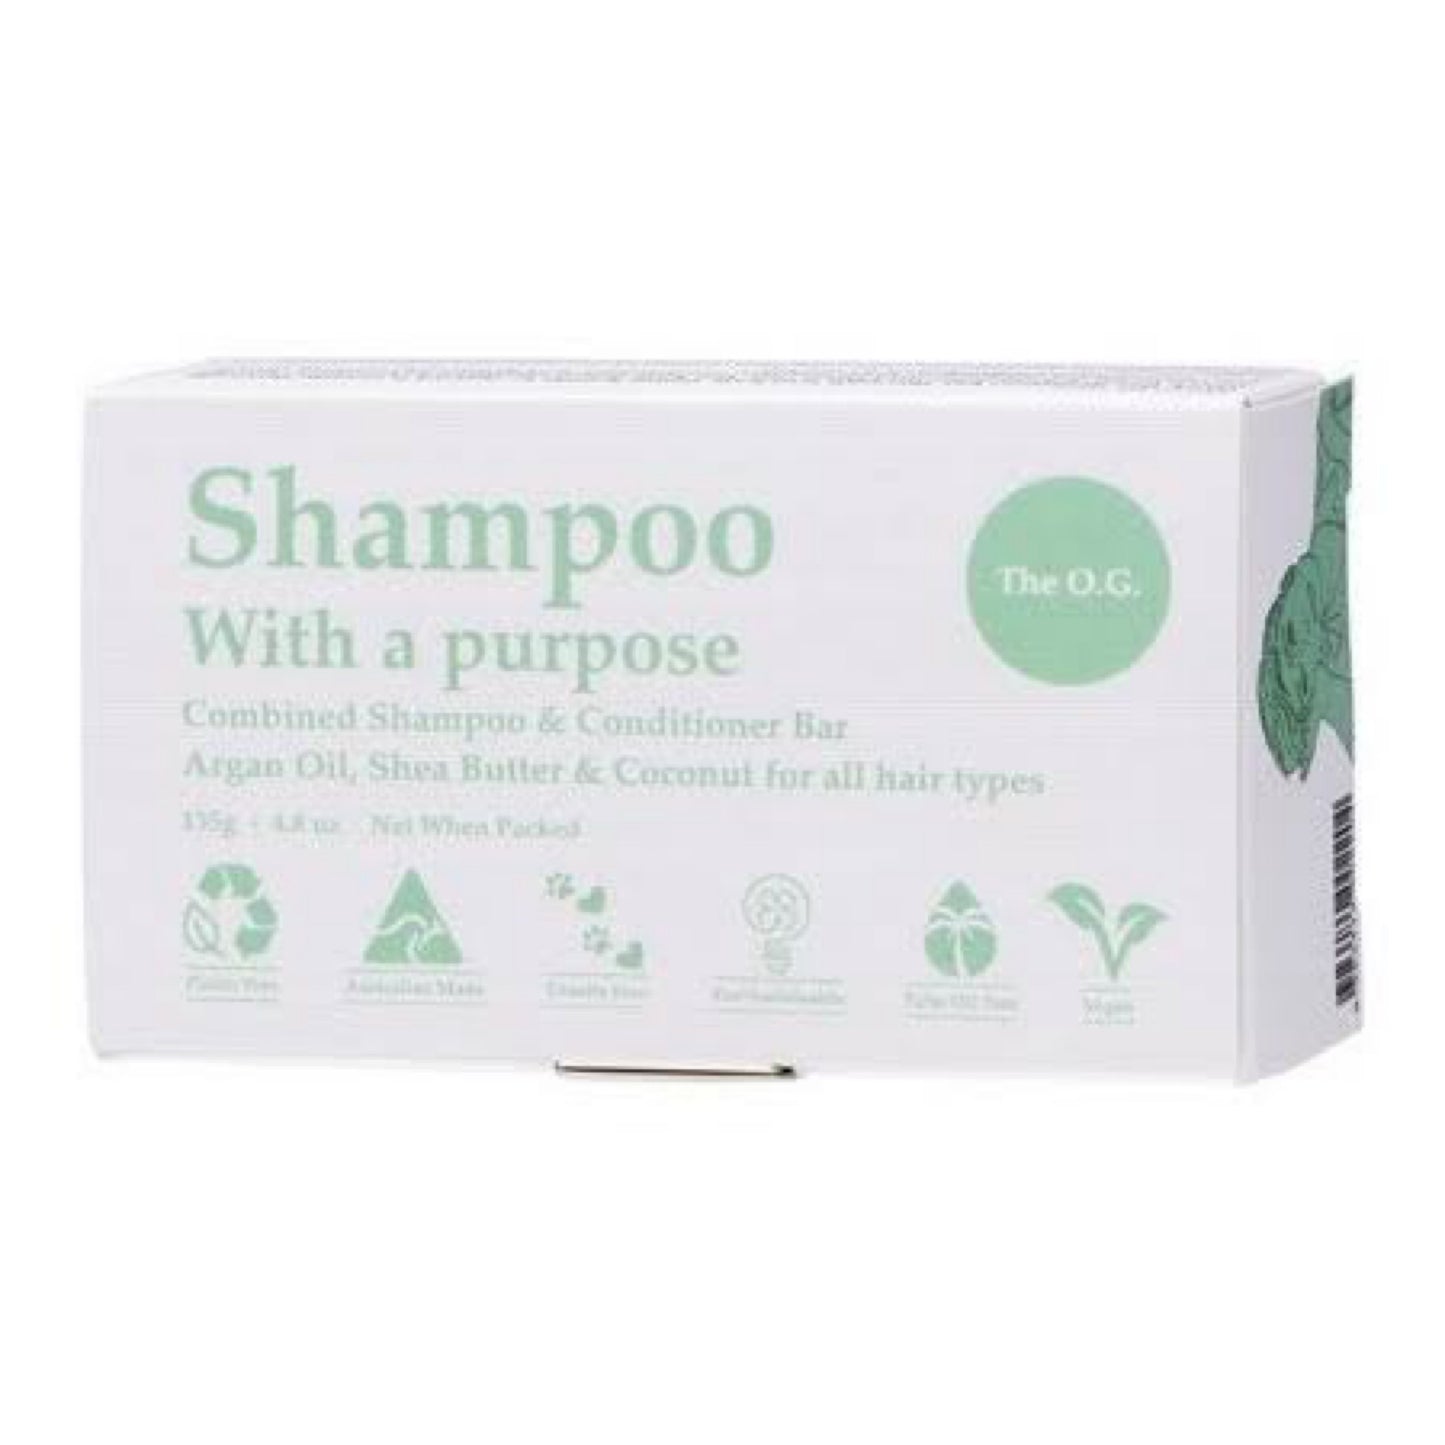 Shampoo With A Purpose Bar - The O.G. - For All Hair Types 135g